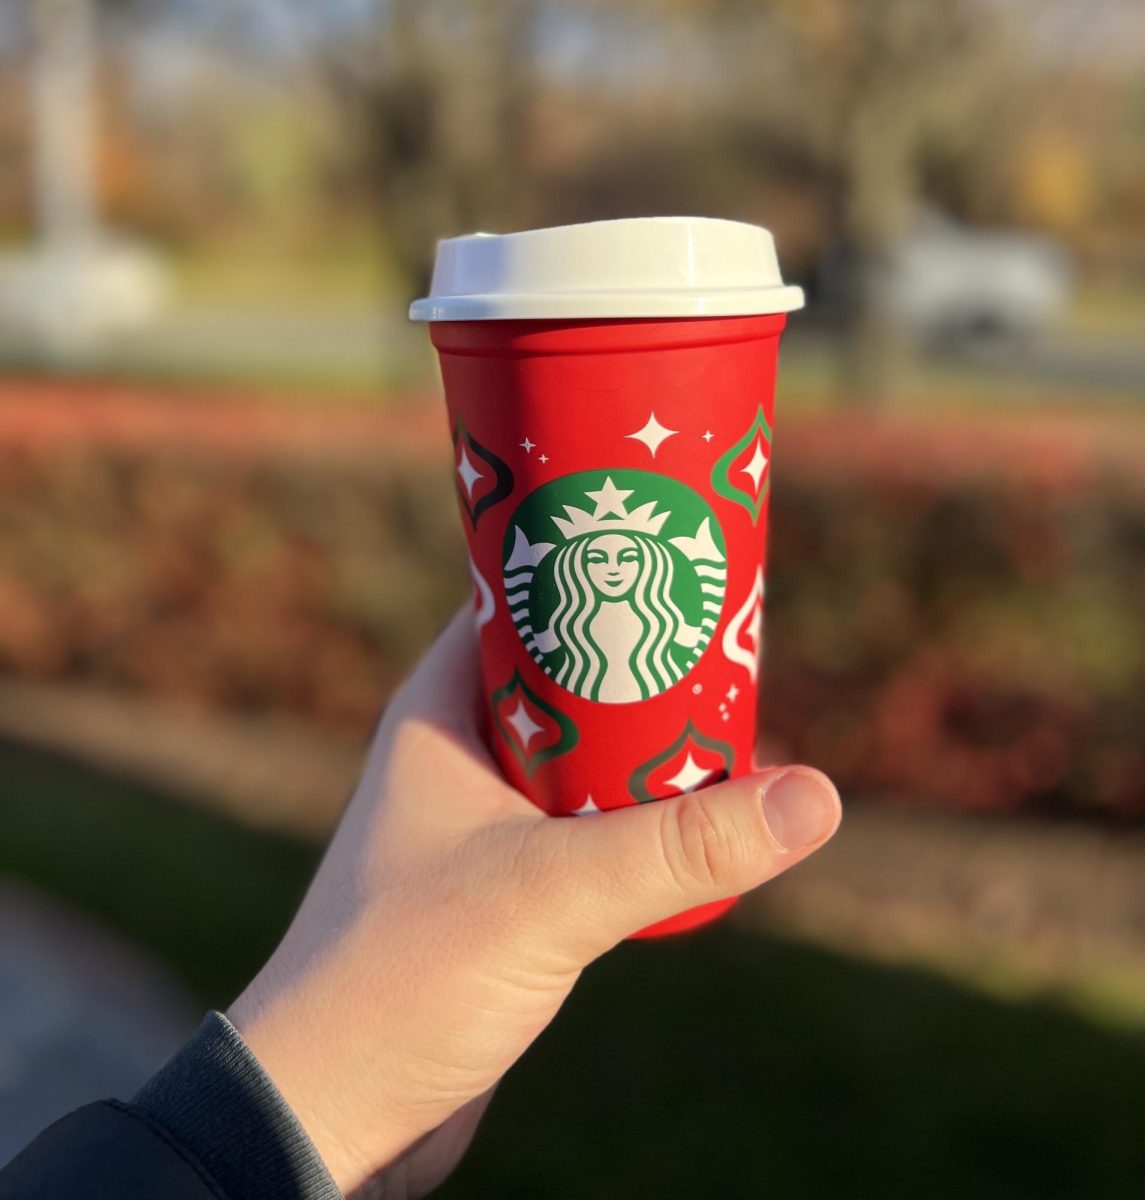 Starbucks Red Cup Day has become a holiday tradition for many.